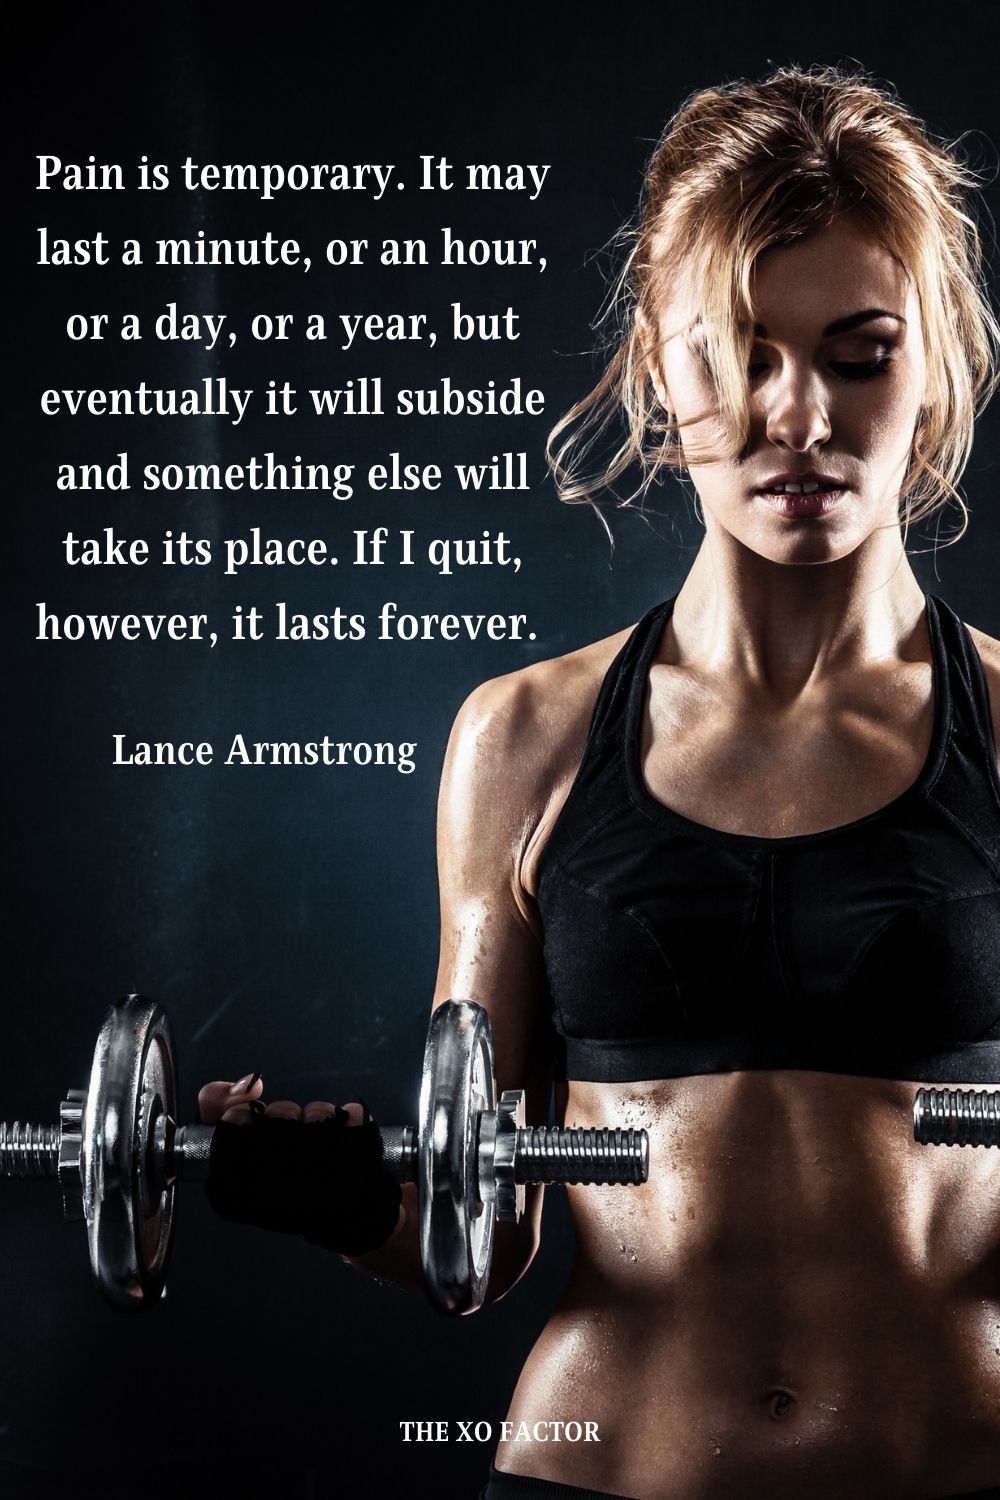 Pain is temporary. It may last a minute, or an hour, or a day, or a year, but eventually it will subside and something else will take its place. If I quit, however, it lasts forever.  Lance Armstrong